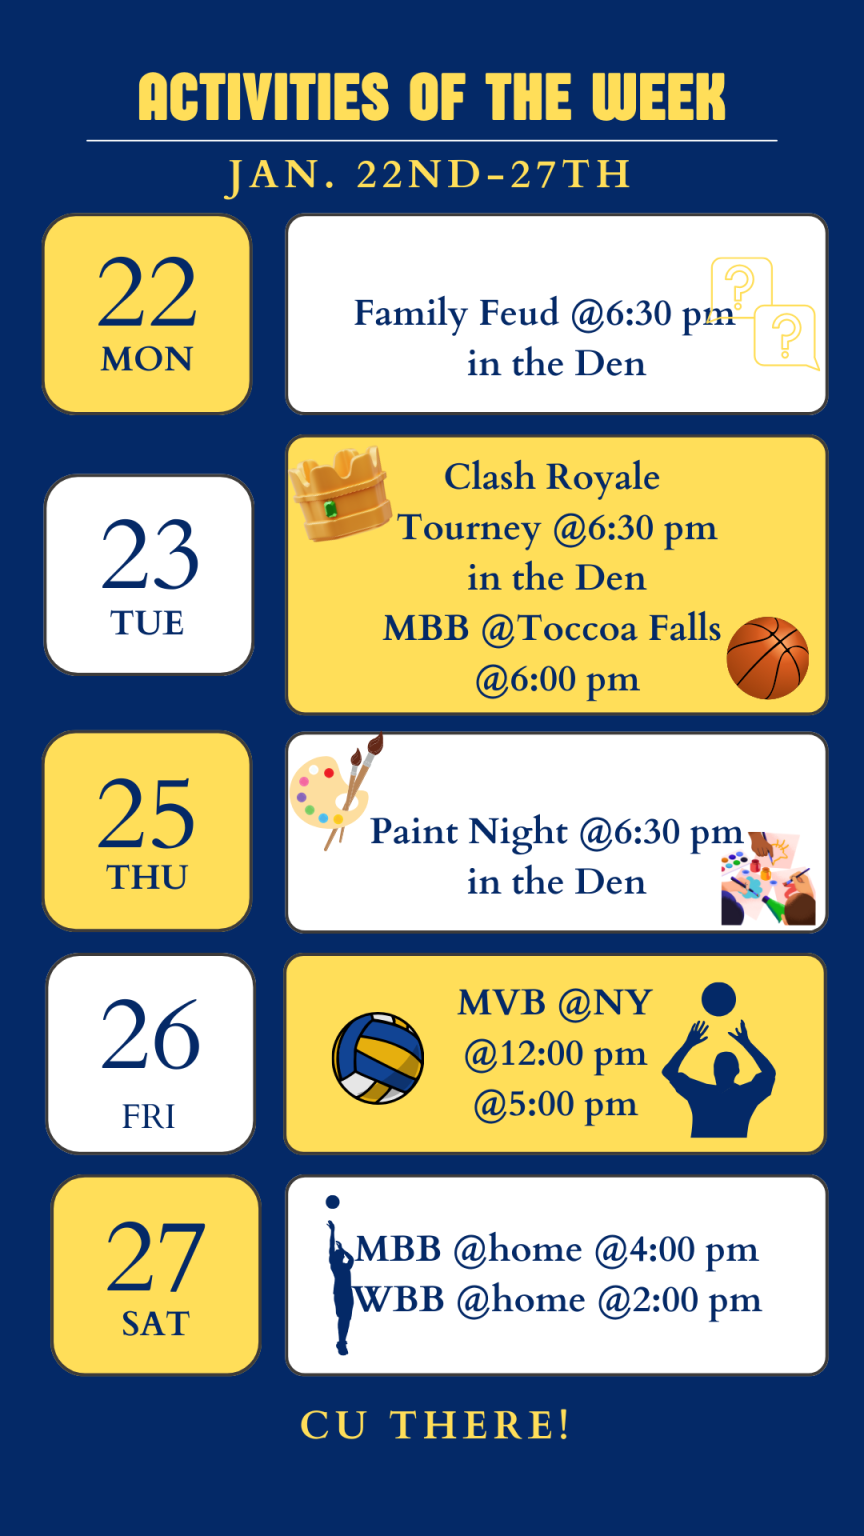 Events of the week. Jan. 22-27th.